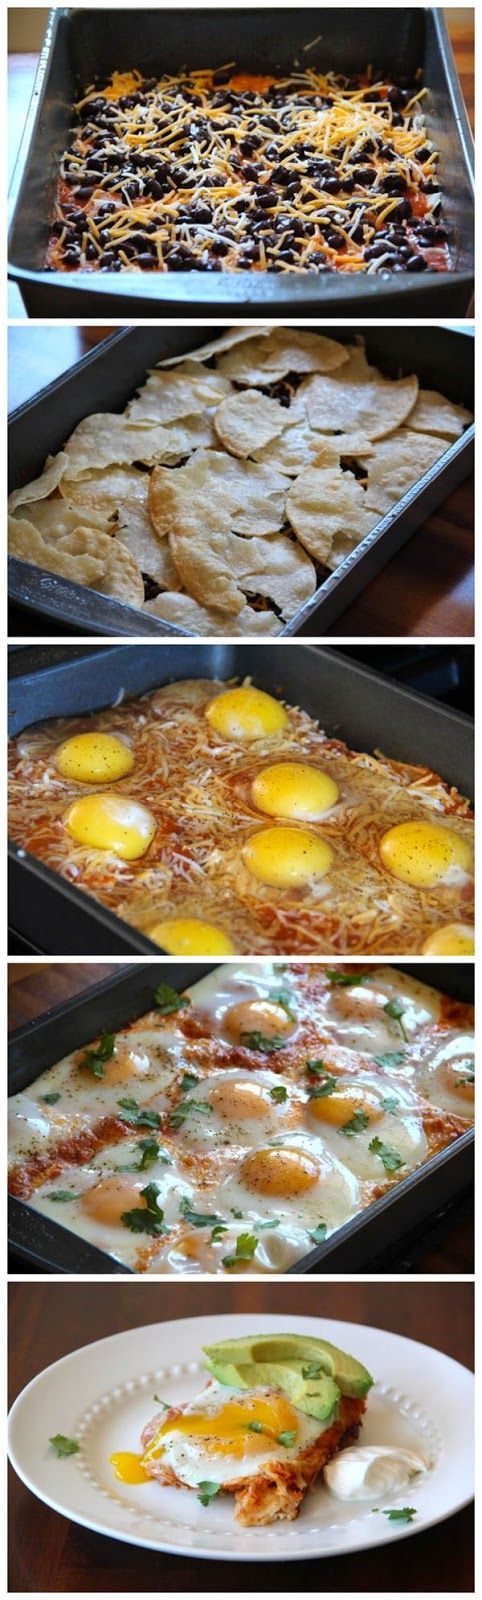 Huevos Rancheros Casserole – Maybe for a special breakfast when kids stay over.